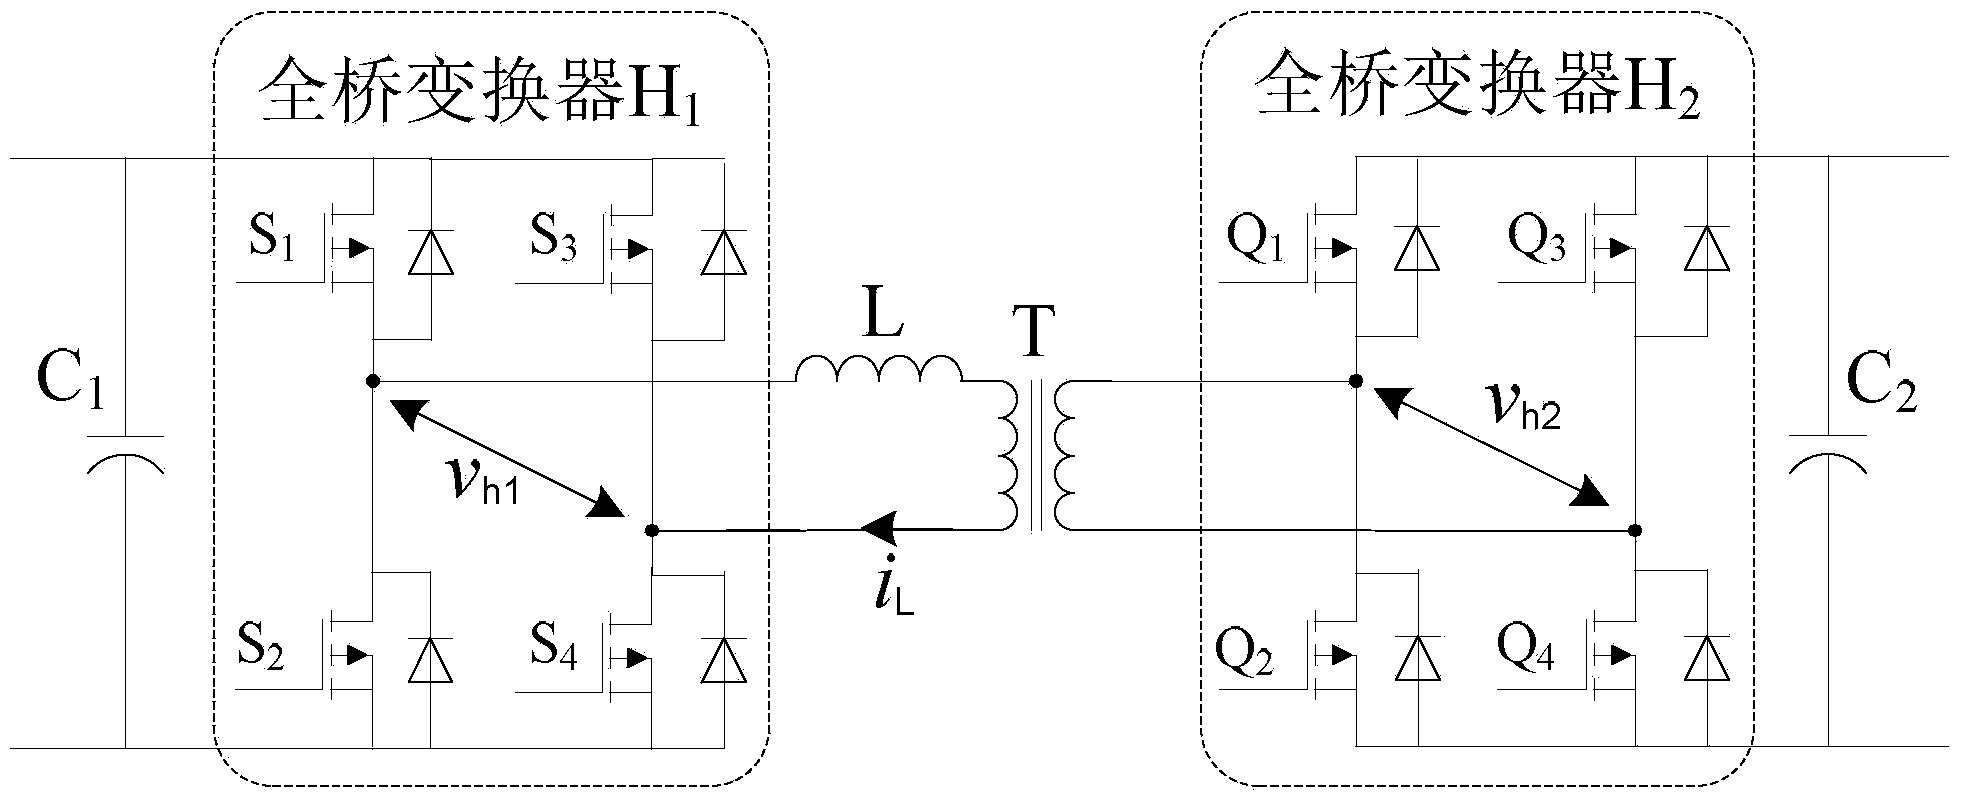 Mixed phase-shifting control method used for dually-active full-bridge direct current converter